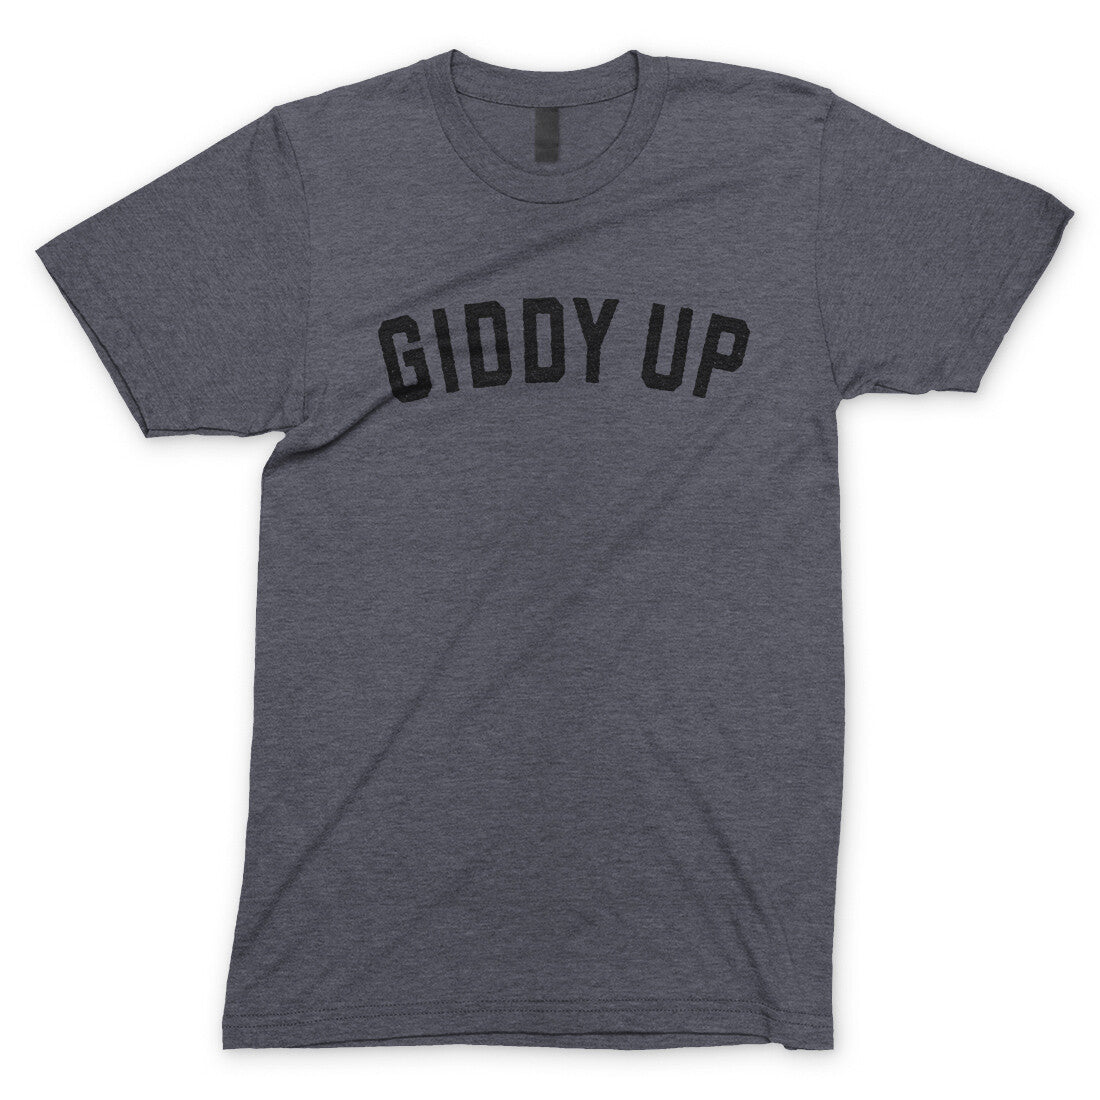 Giddy Up in Dark Heather Color